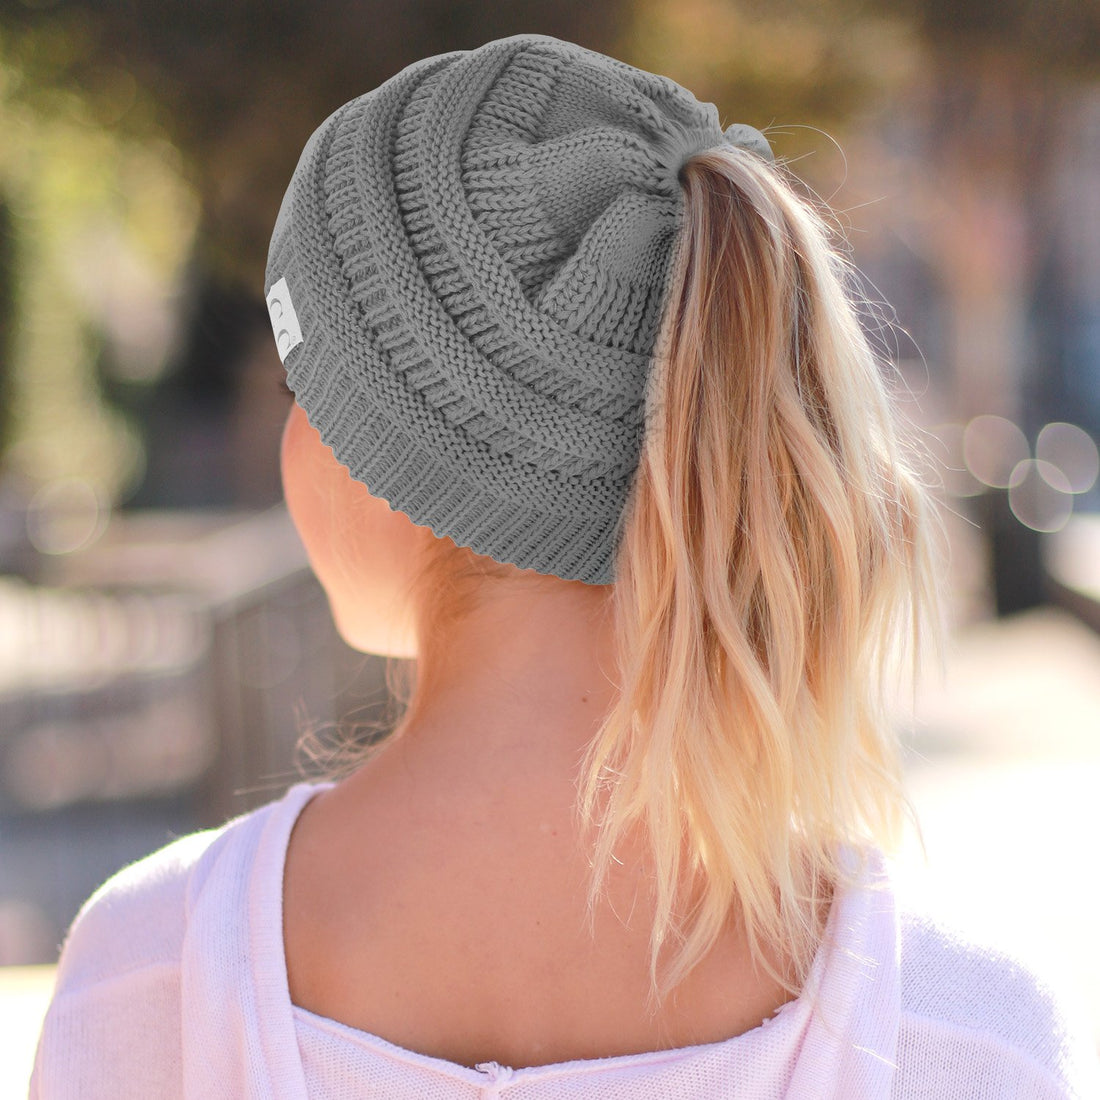 Trendy Apparel Shop Women's Lightweight Ribbed Knit 365 Stretchable Ponytail Beanie Cap